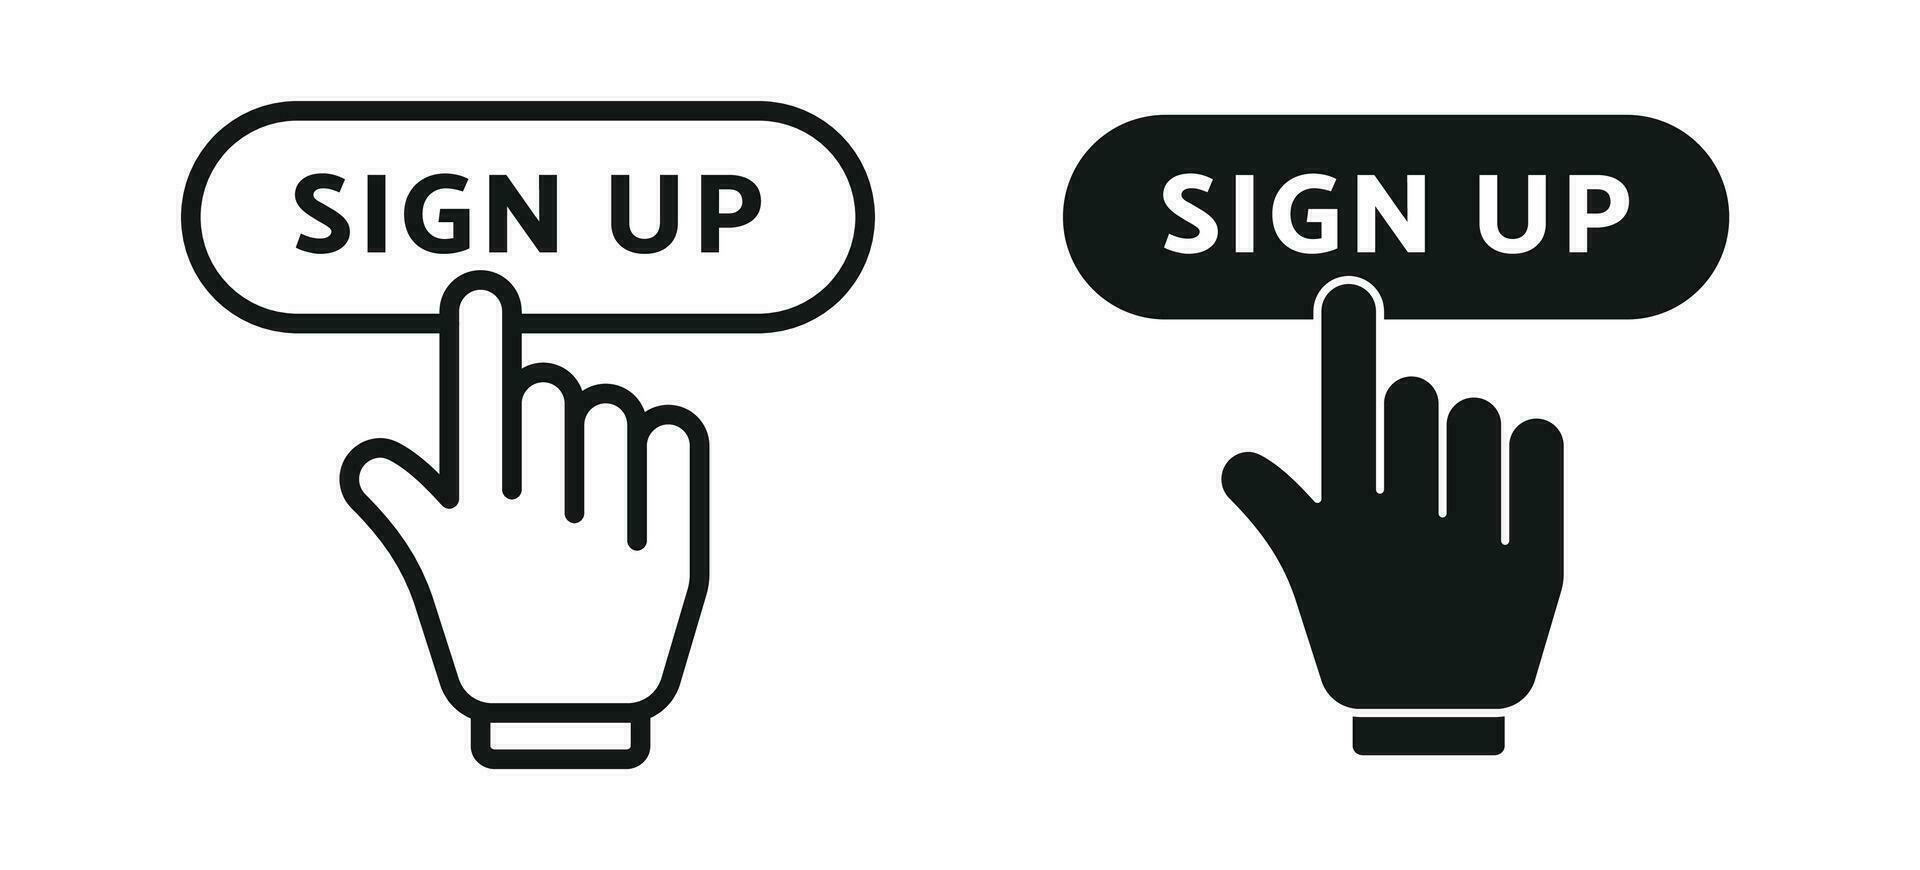 sign up button with hand sign. register now vector icon. new user registration call to action button for apps and website UI designs.